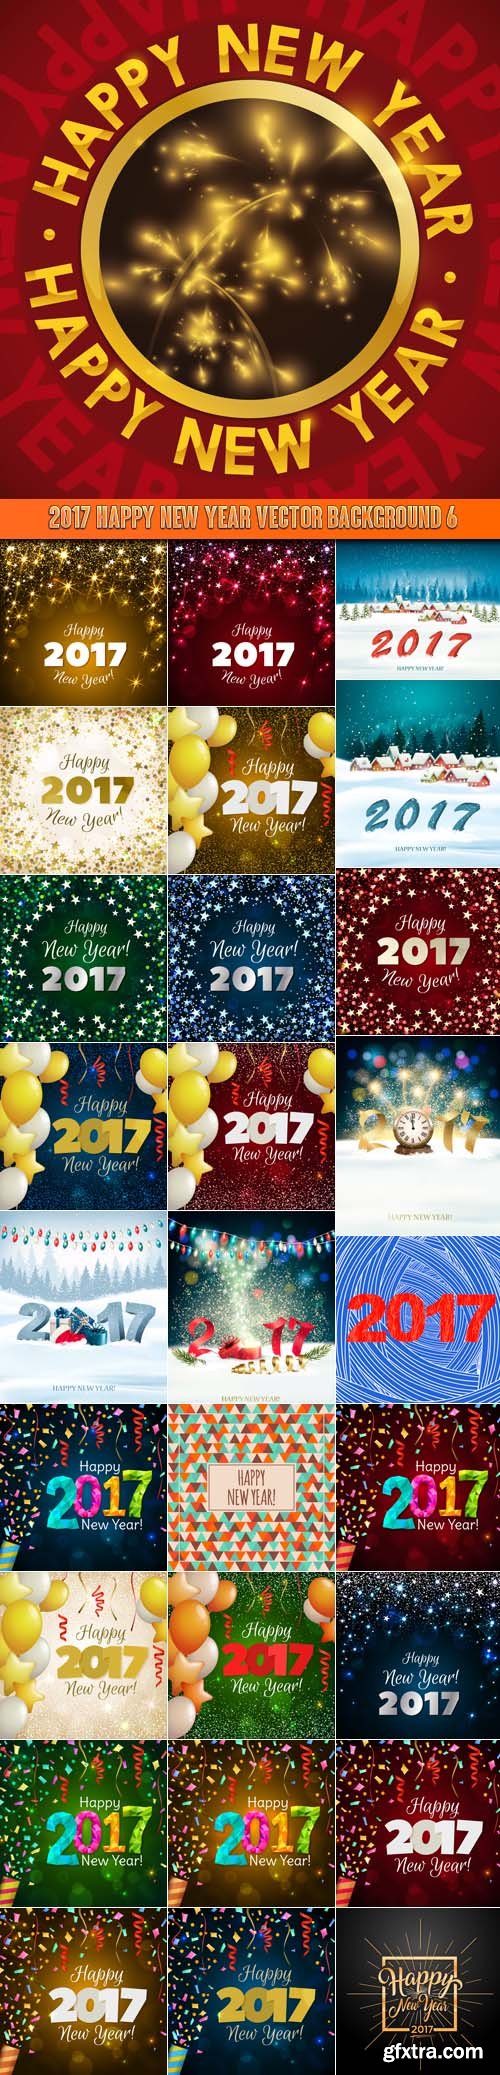 2017 Happy New Year vector background 6